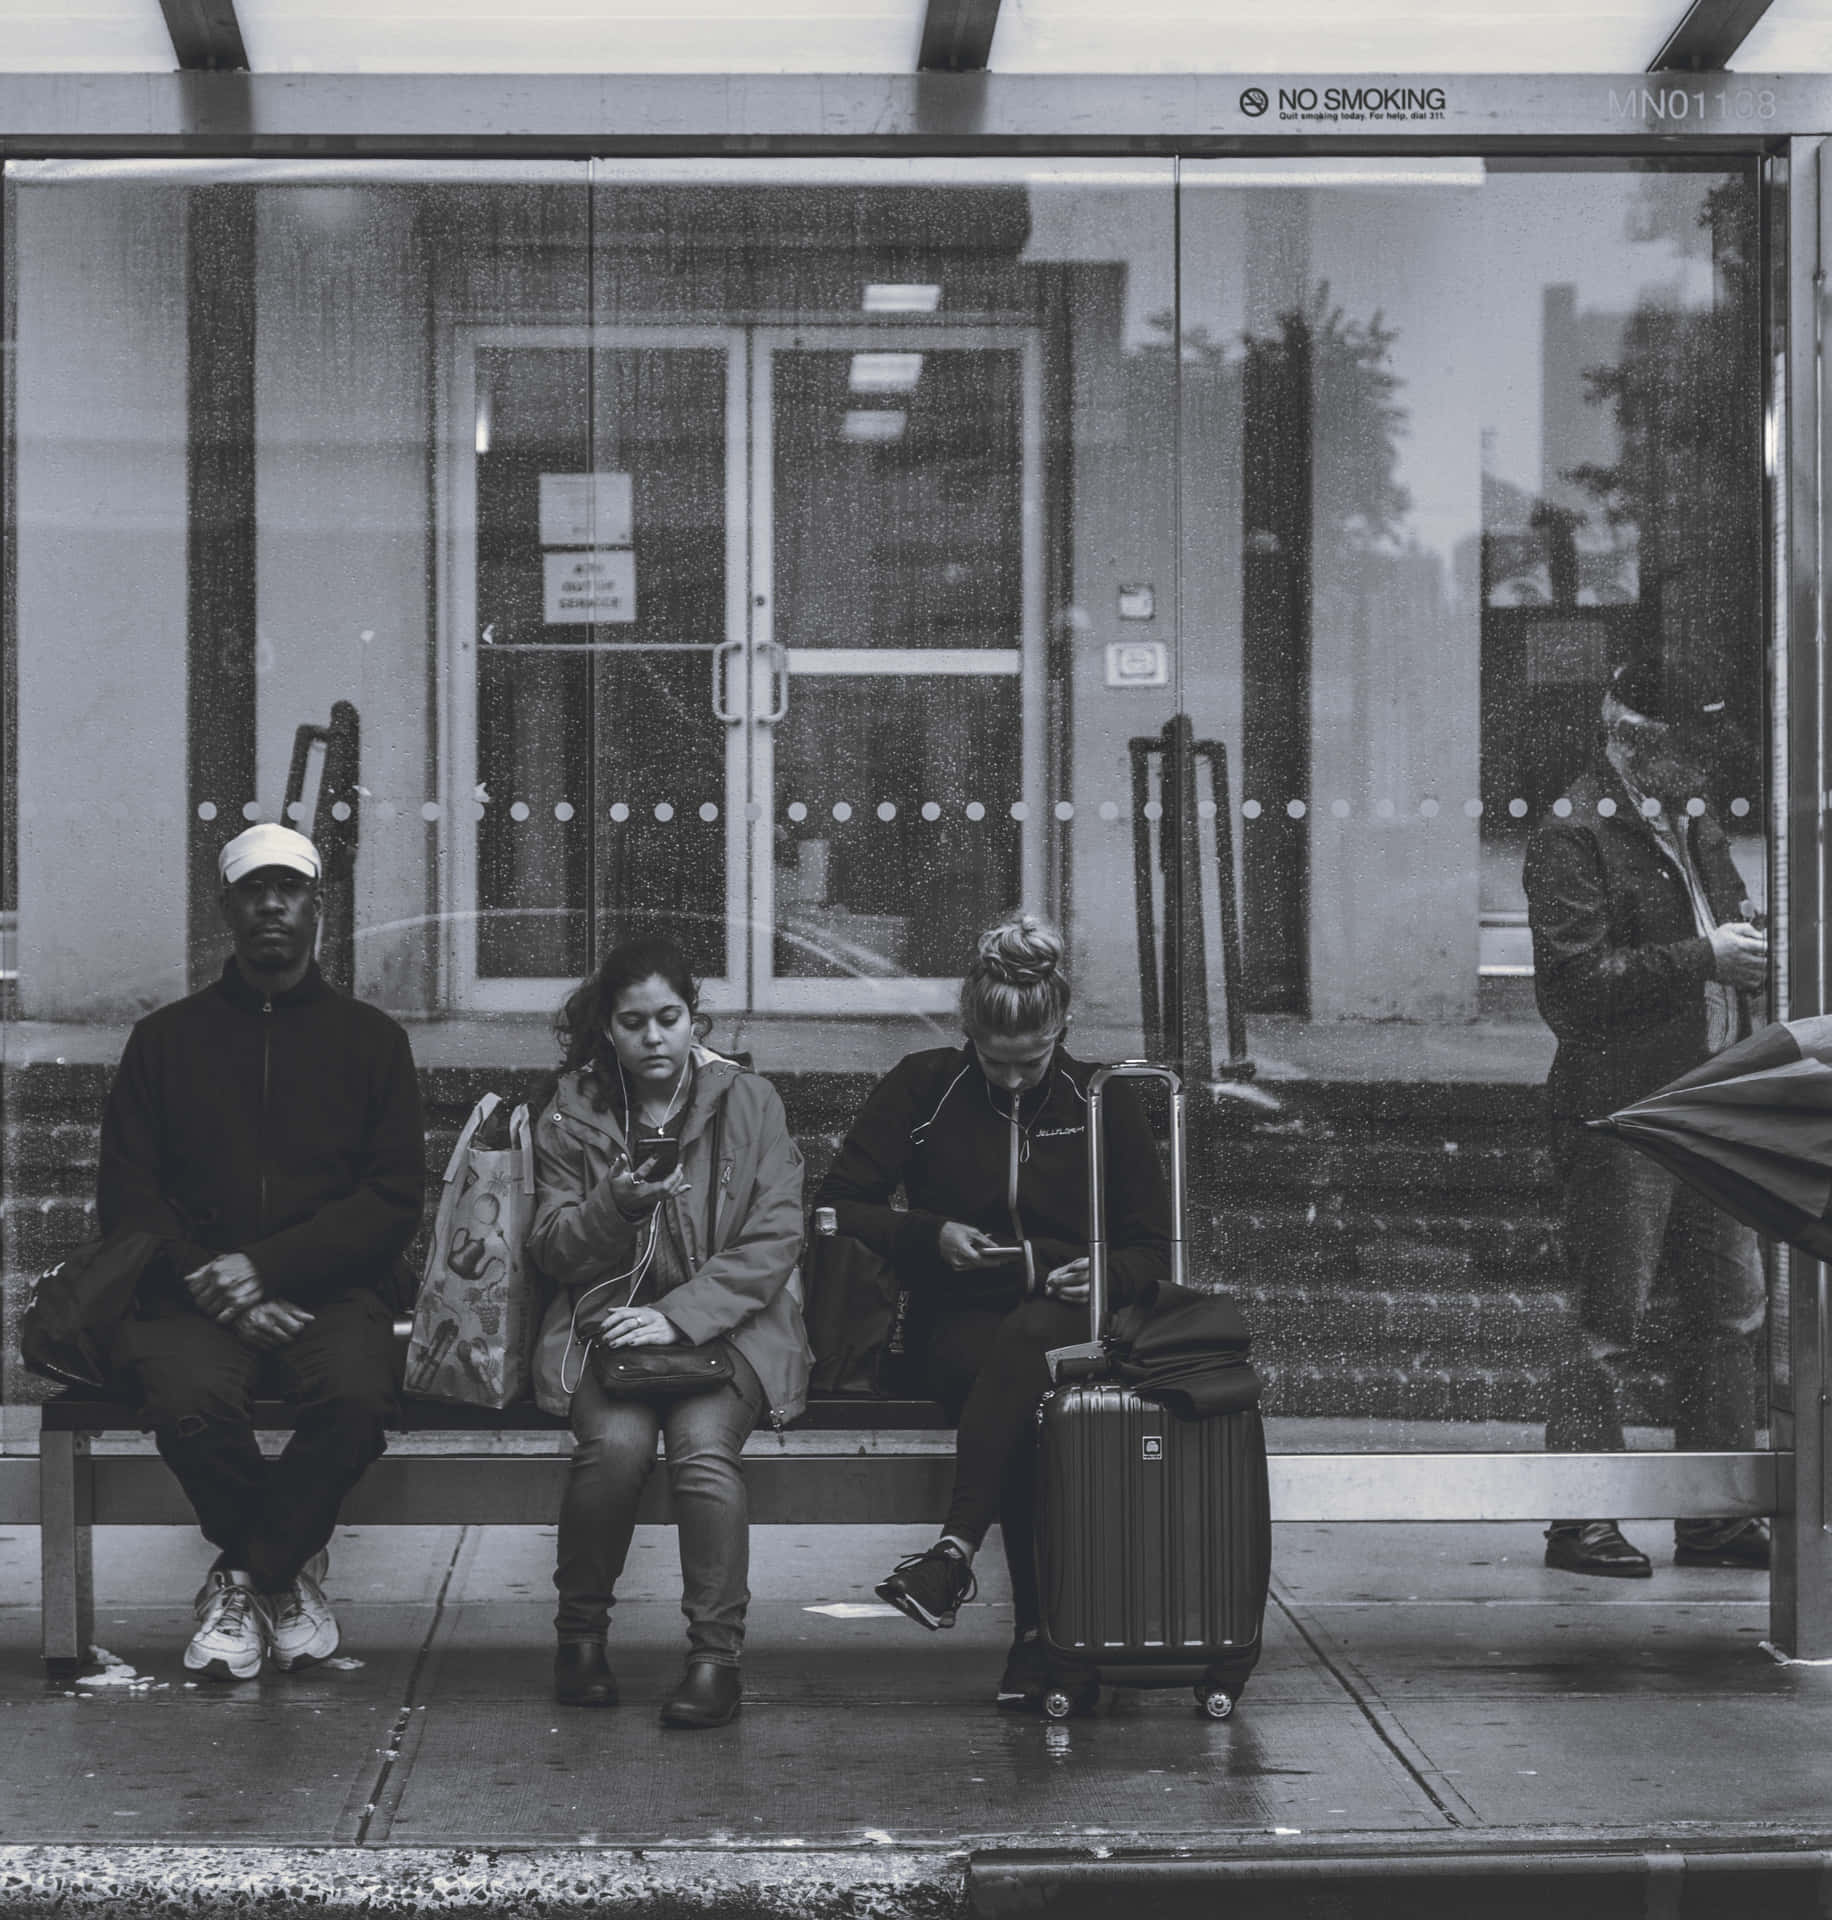 A Group Of People Sitting On A Bench